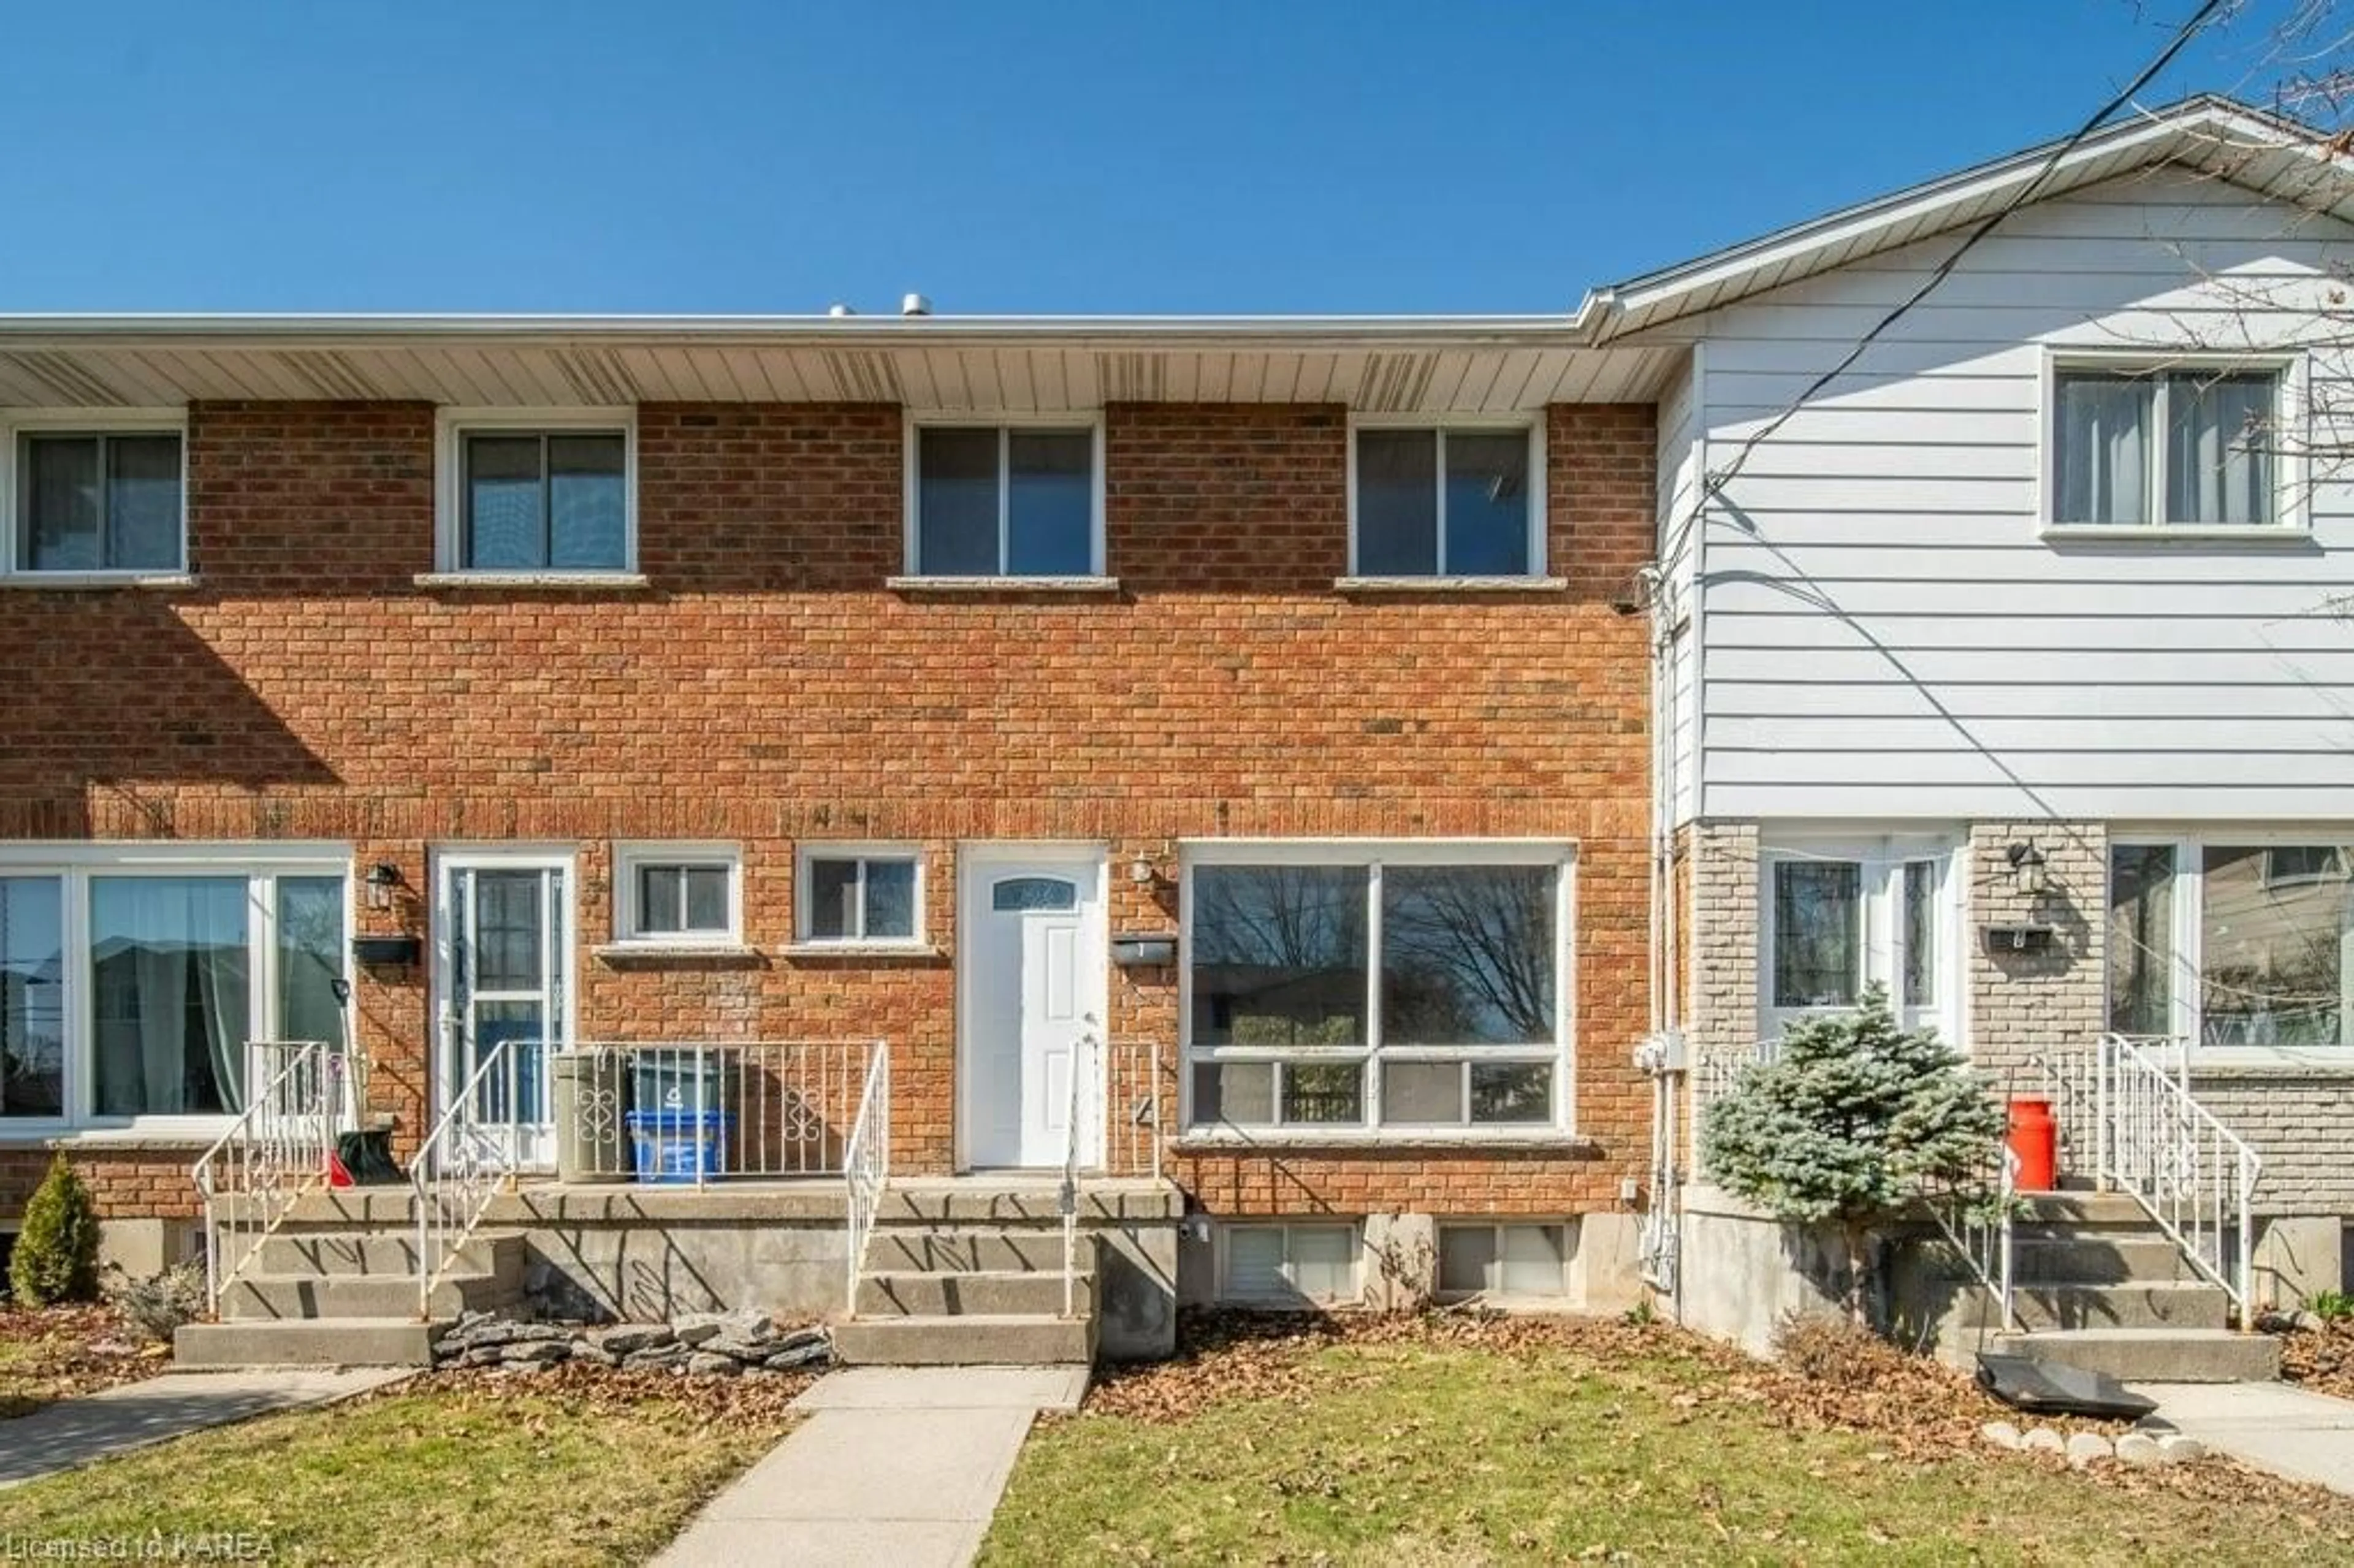 Home with brick exterior material for 26 Addington Crt #7, Amherstview Ontario K7N 1C5